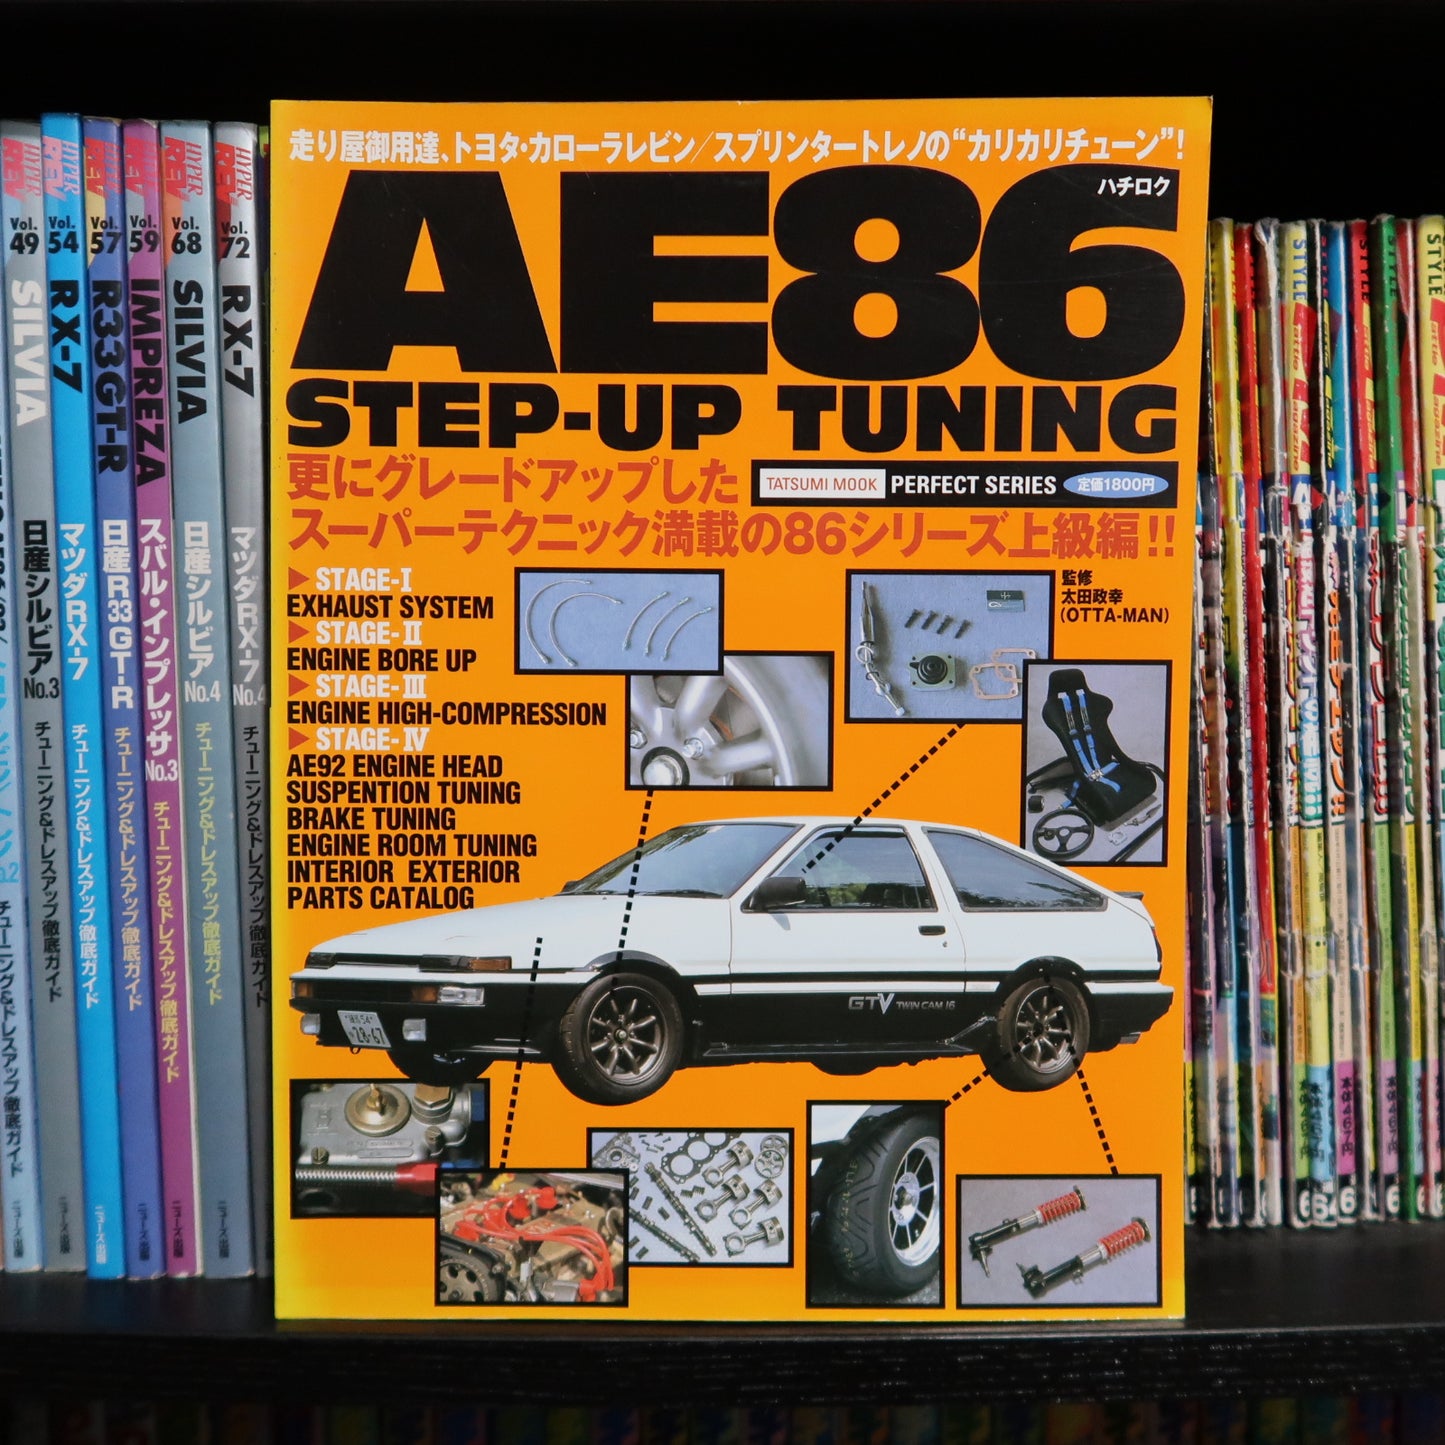 AE86 Step-Up Tuning